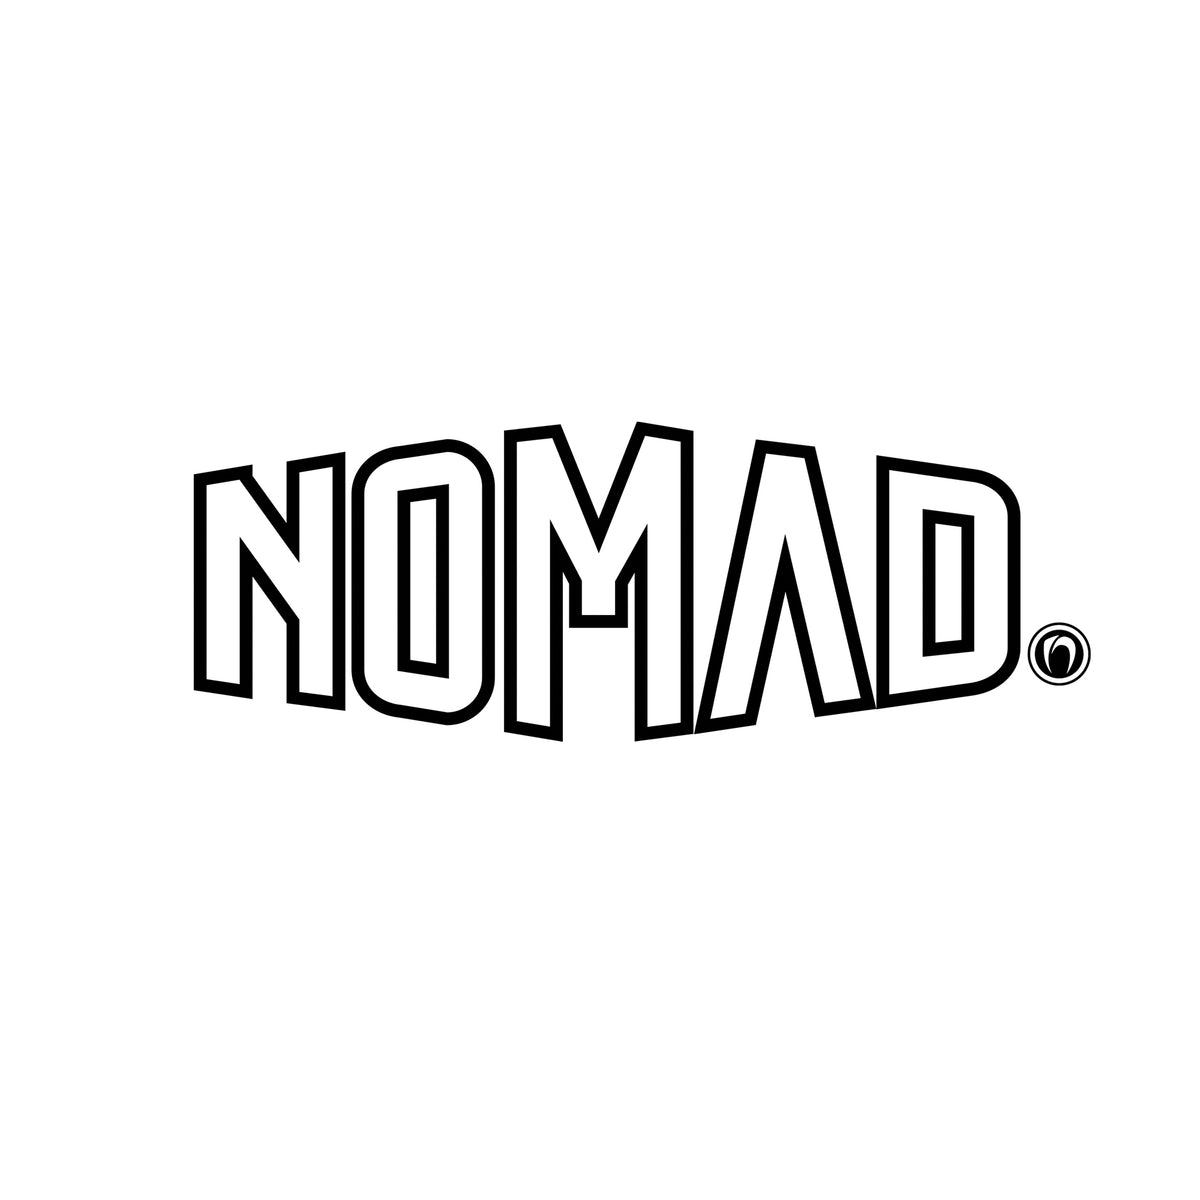 Nomad Represent Tees and Hoodies Now Available!!